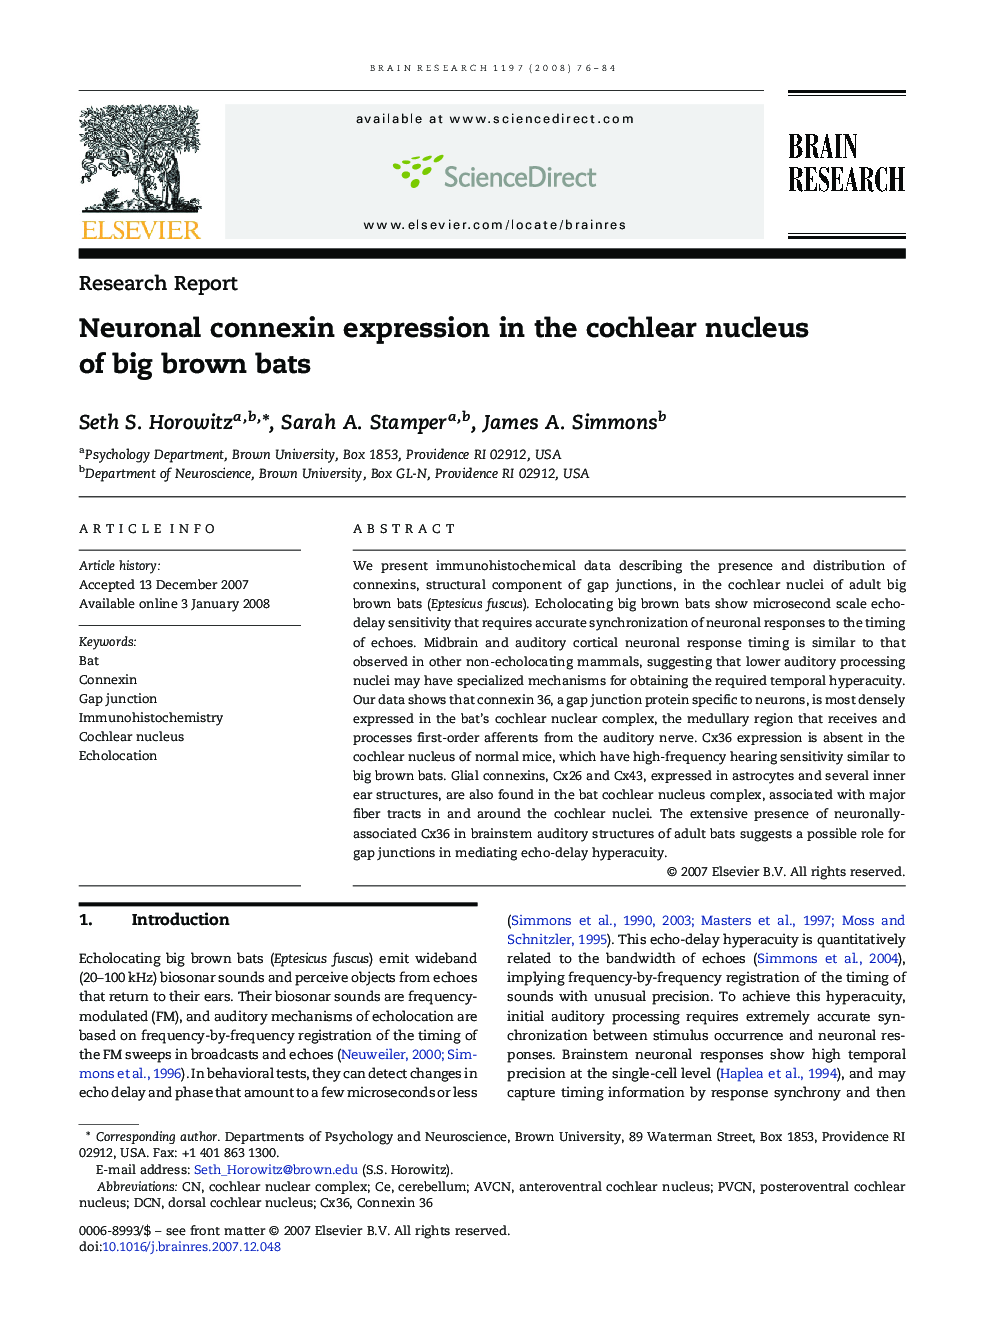 Neuronal connexin expression in the cochlear nucleus of big brown bats